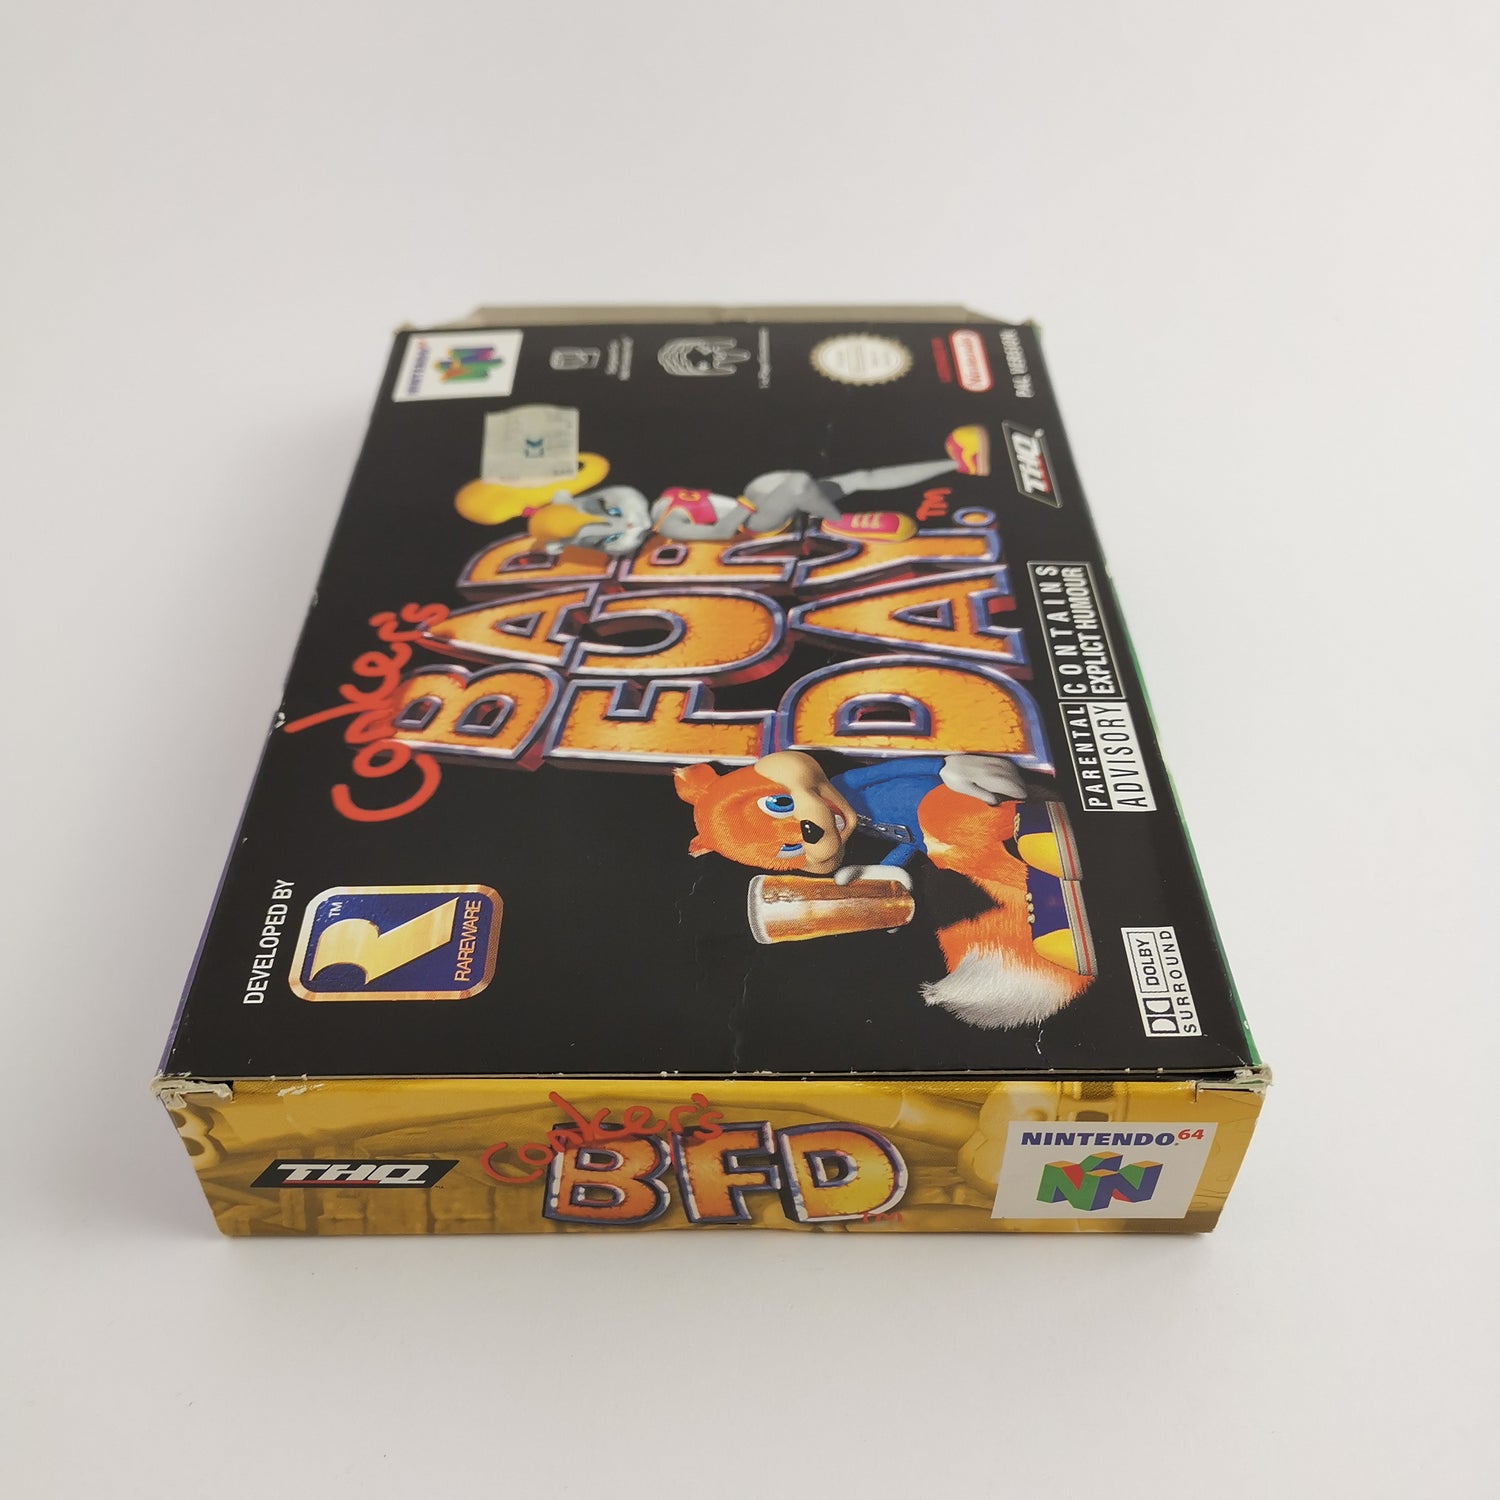 Nintendo 64 Game: Conkers Bad Fur Day | N64 THQ RARE - OVP PAL version